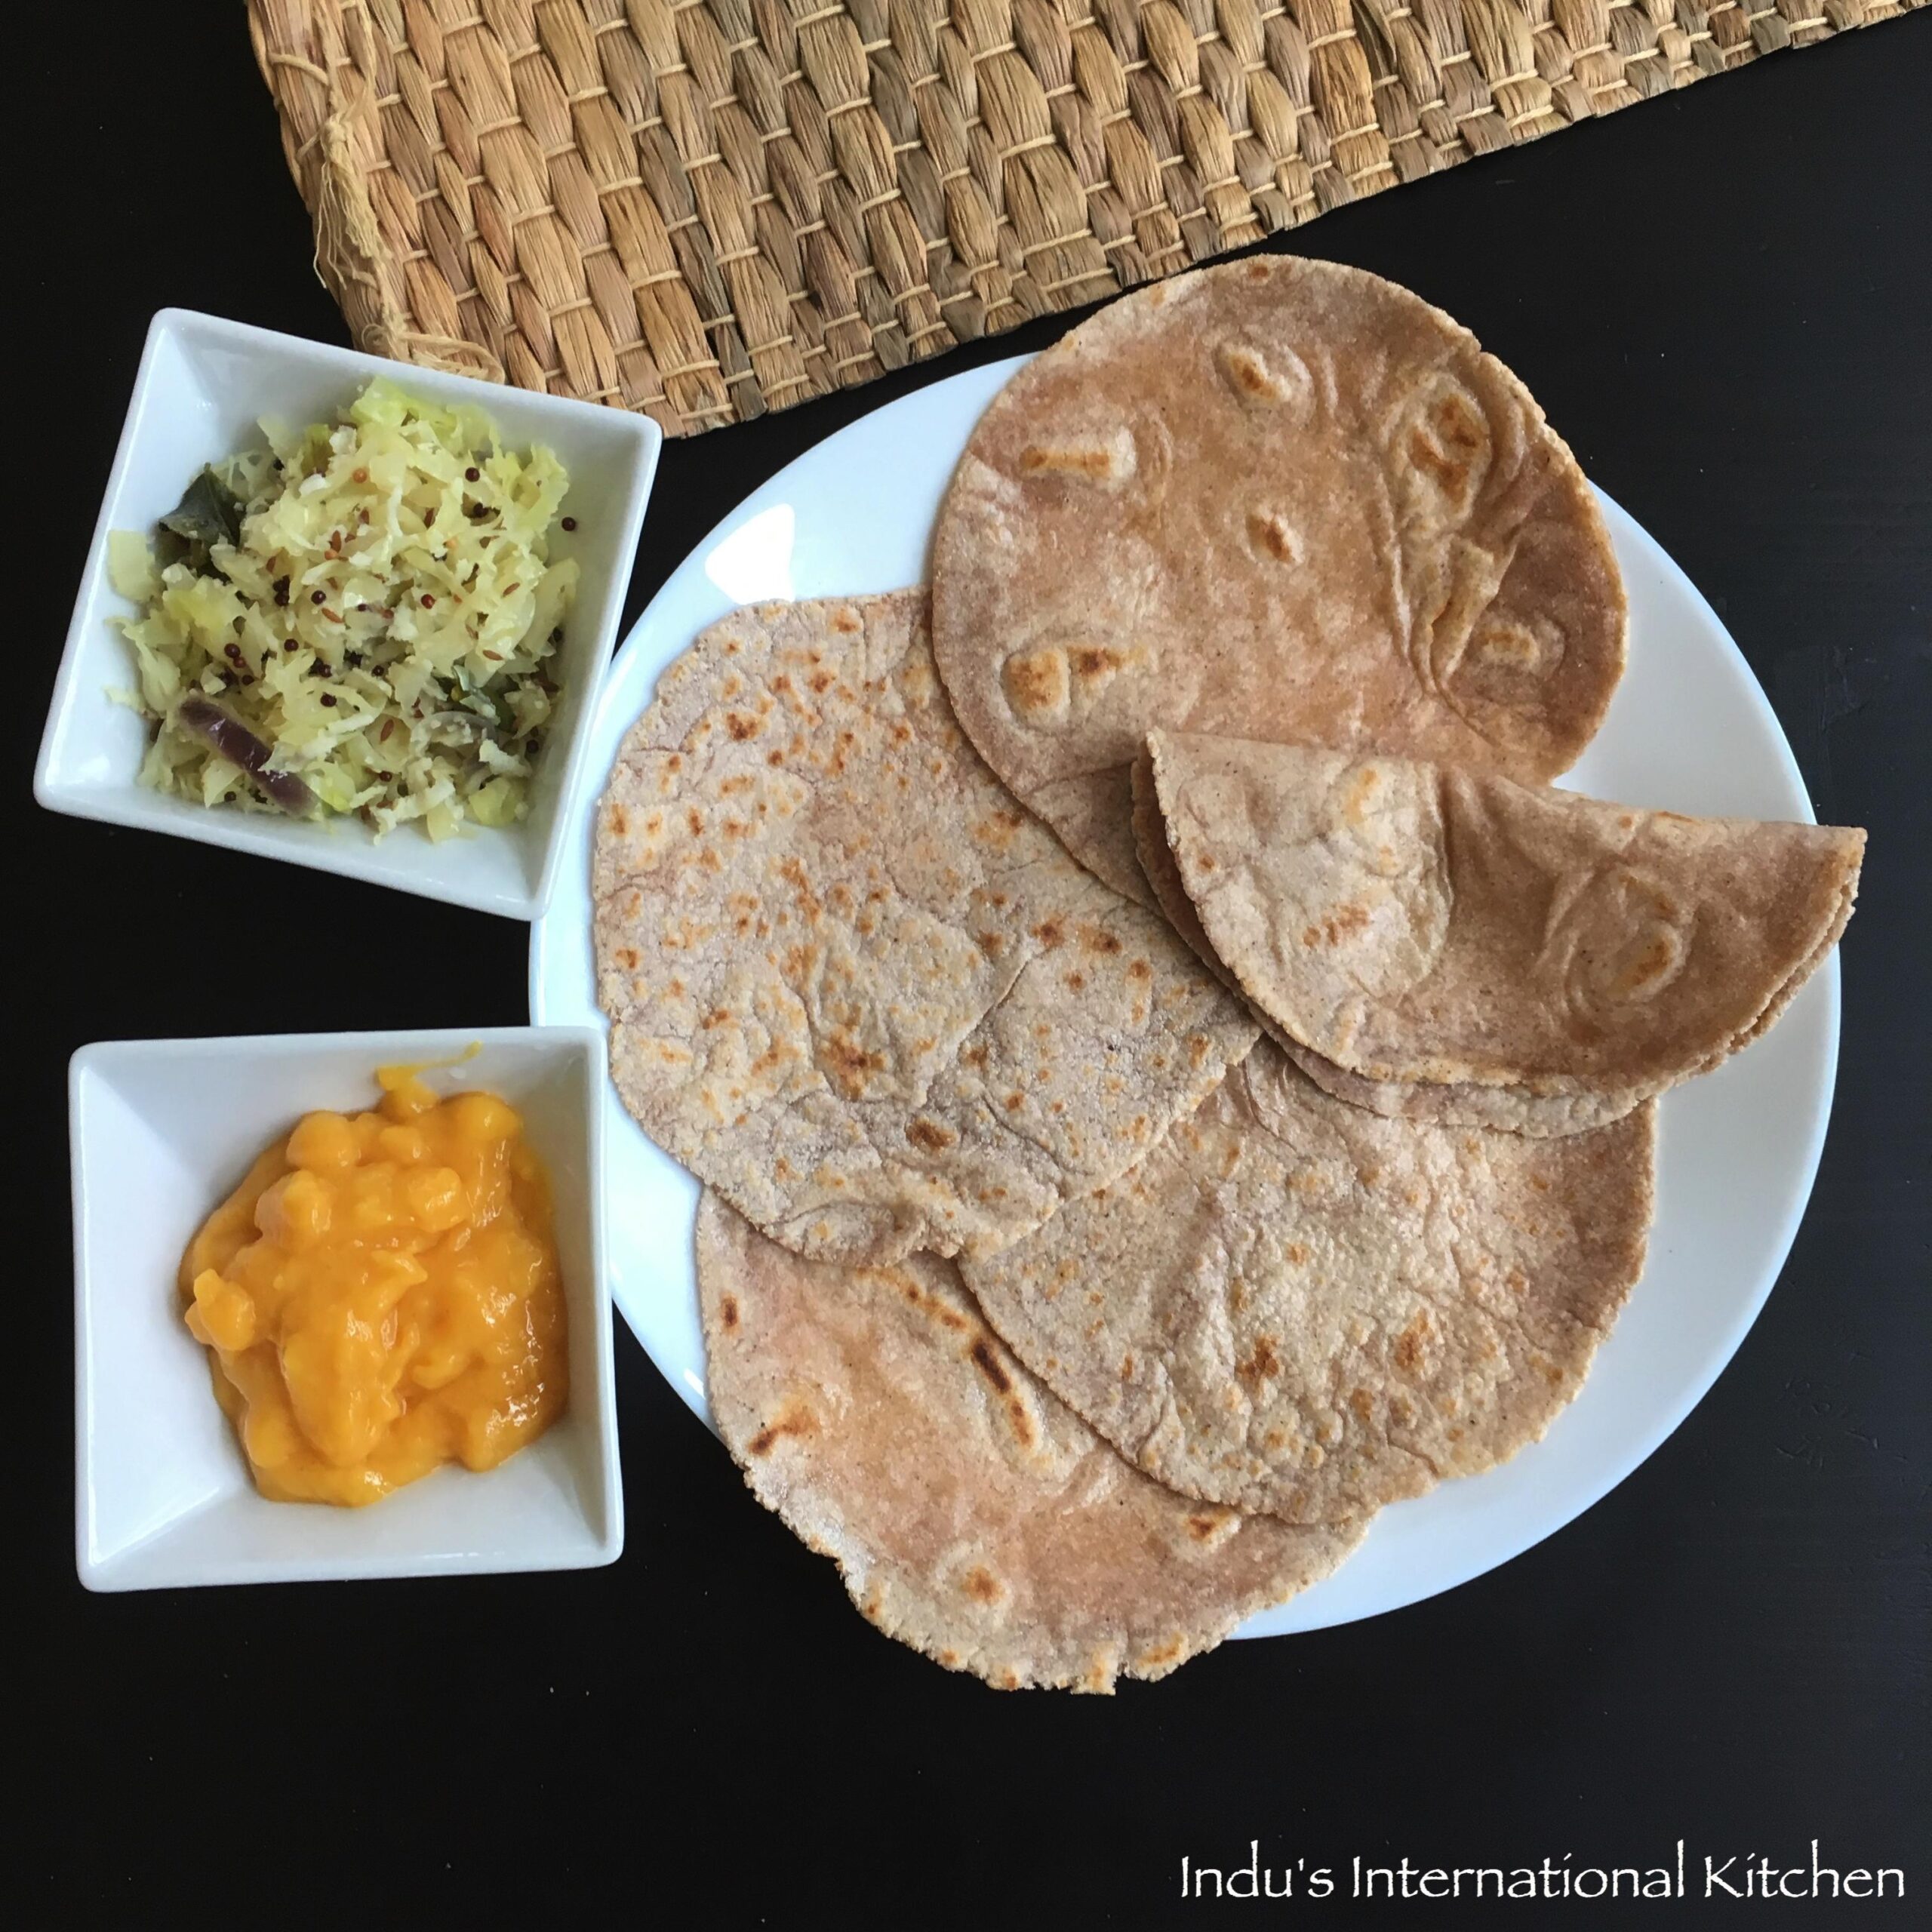  A hearty stack of gluten-free rotis for your next meal.